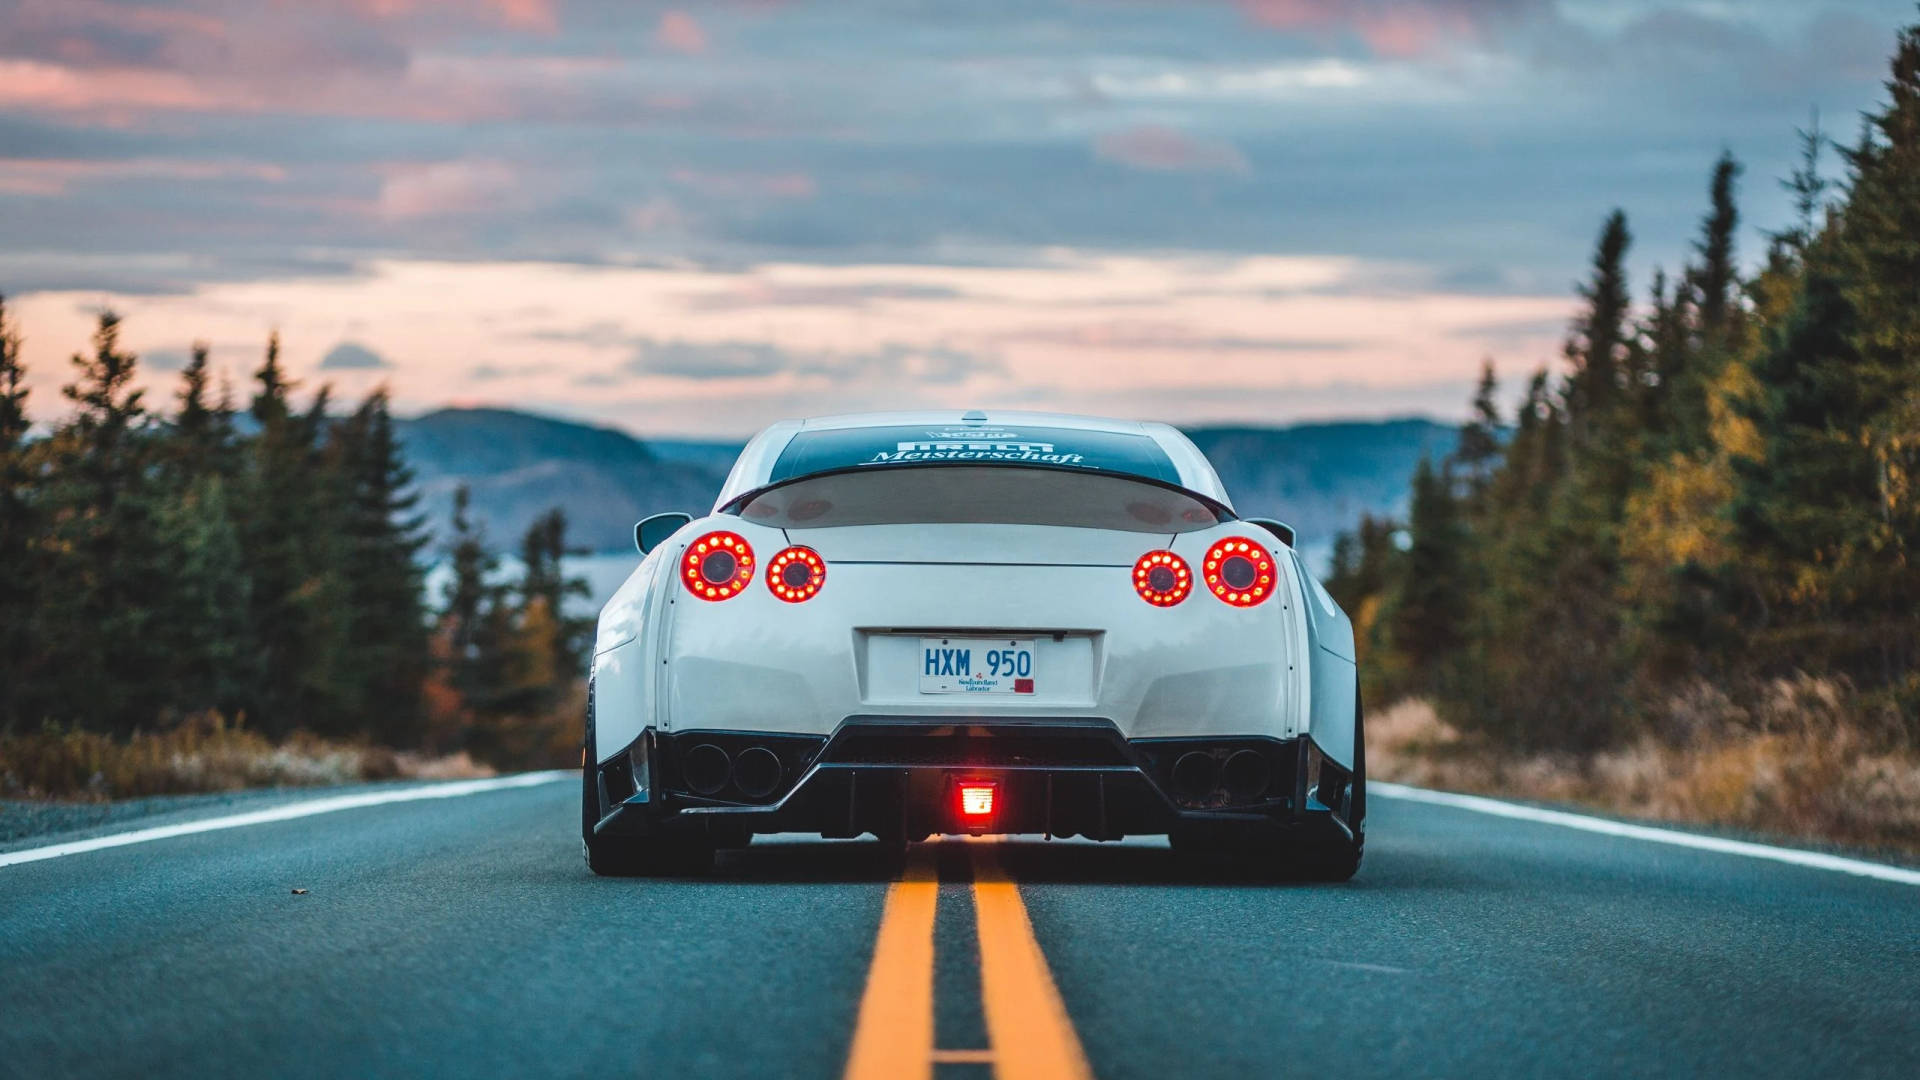 2560 X 1440 Car White Nissan Gt-r Picture